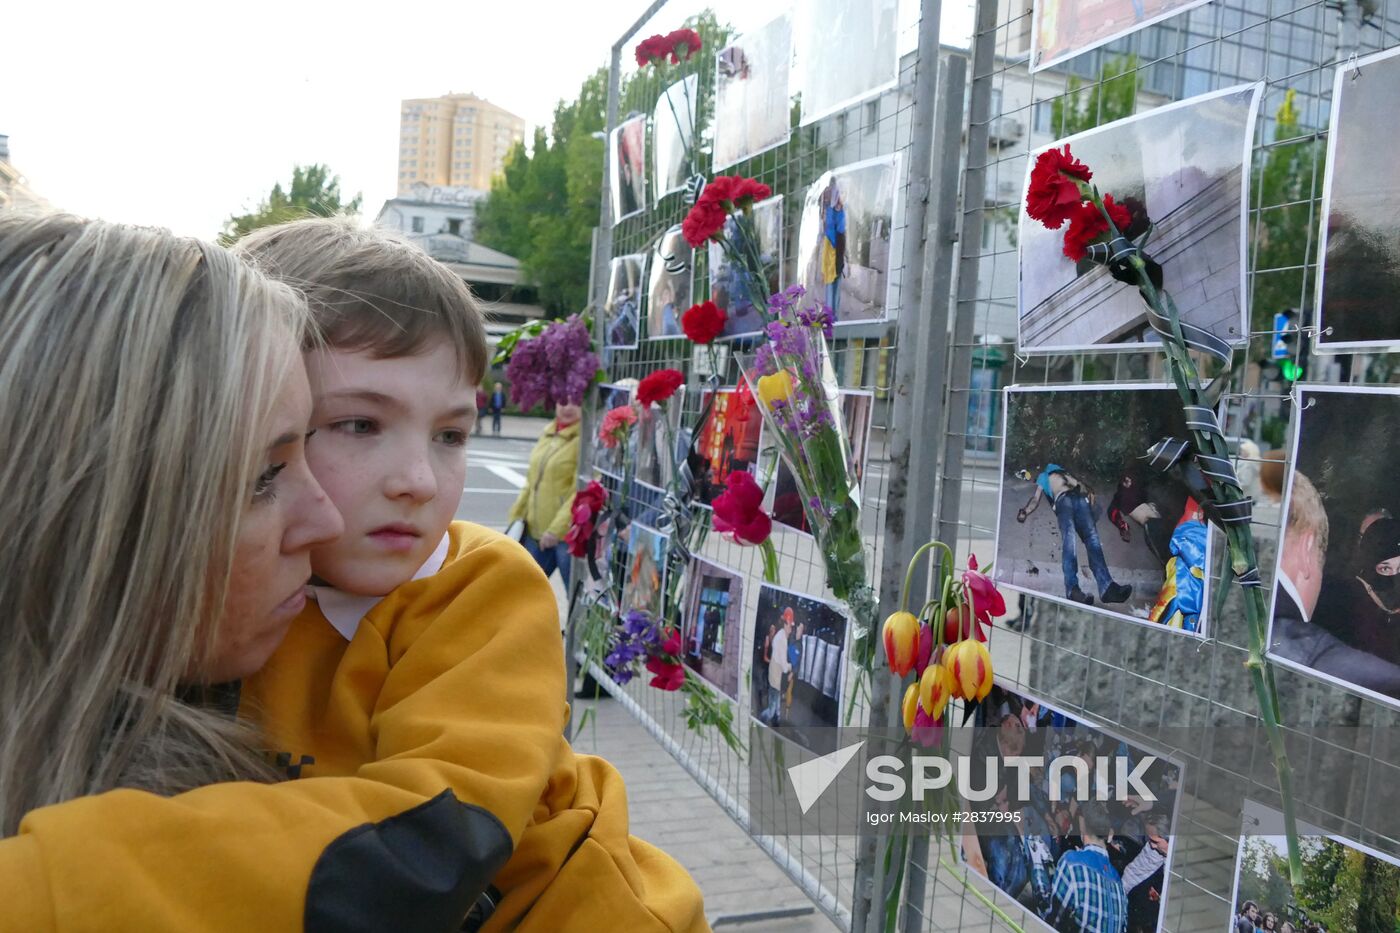 Requiem rally in Donetsk devoted to May 2, 2014 tragedy in Odessa